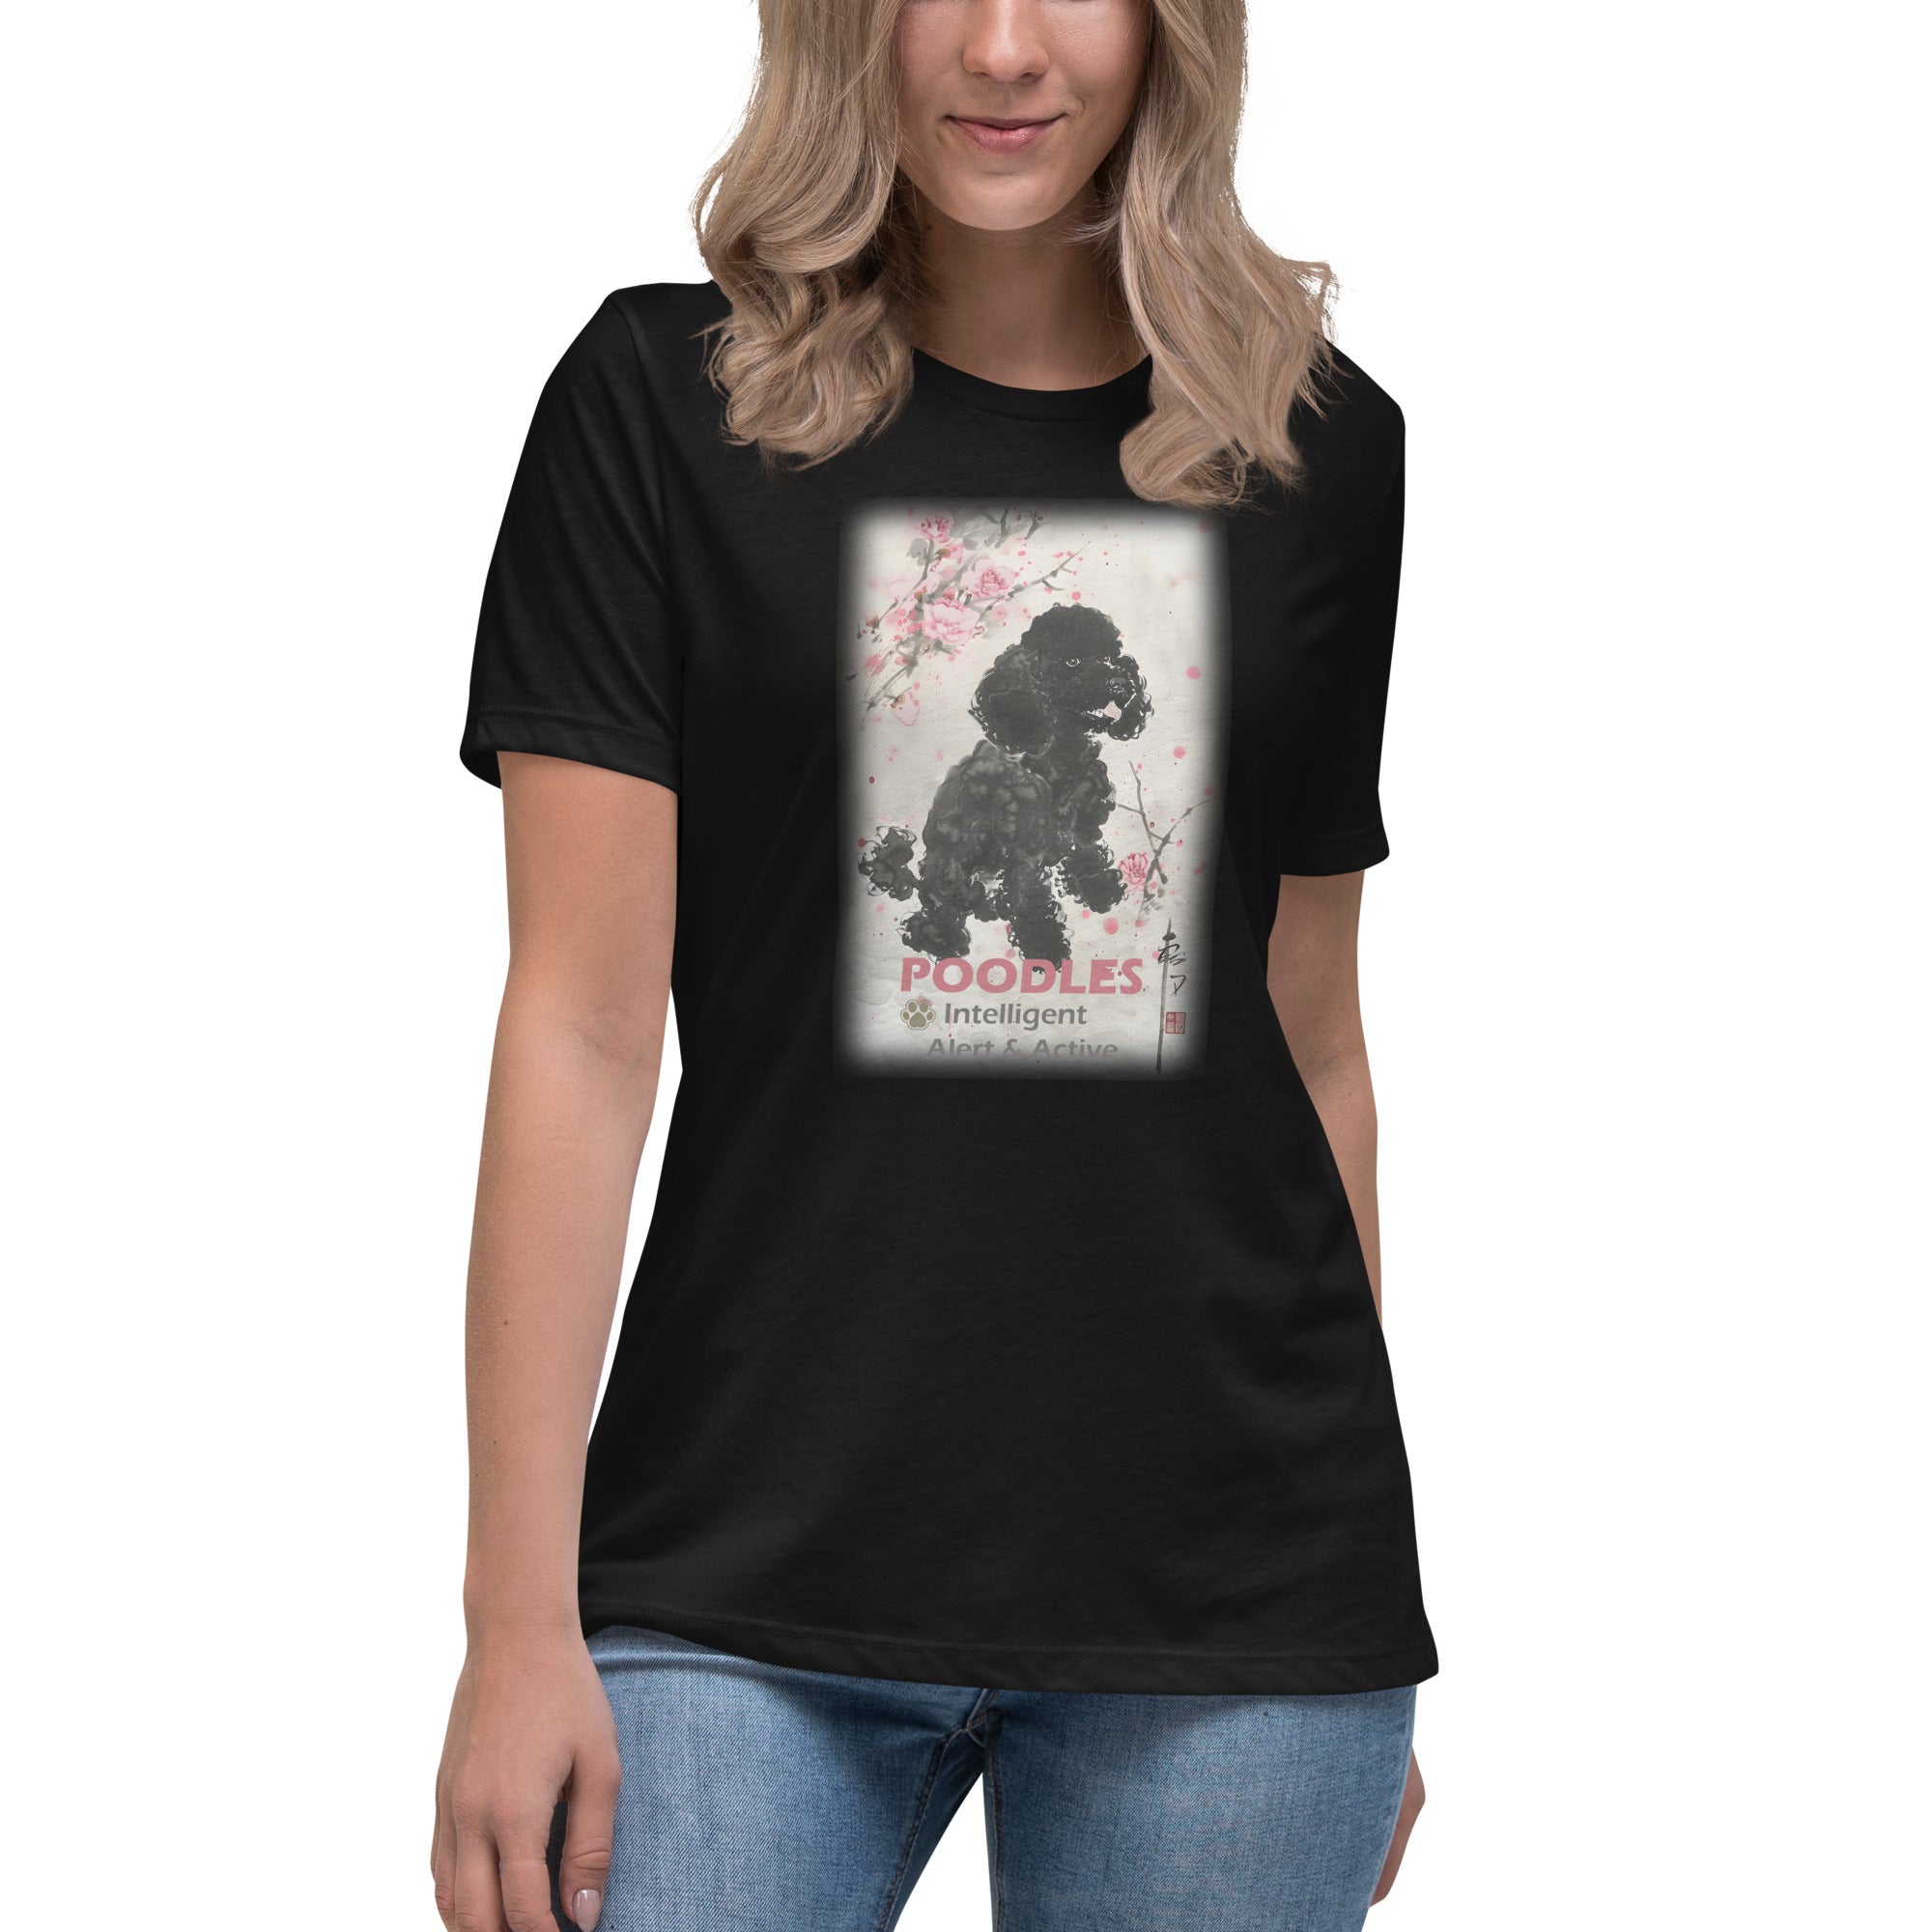 Poodles Women's Relaxed T-Shirt